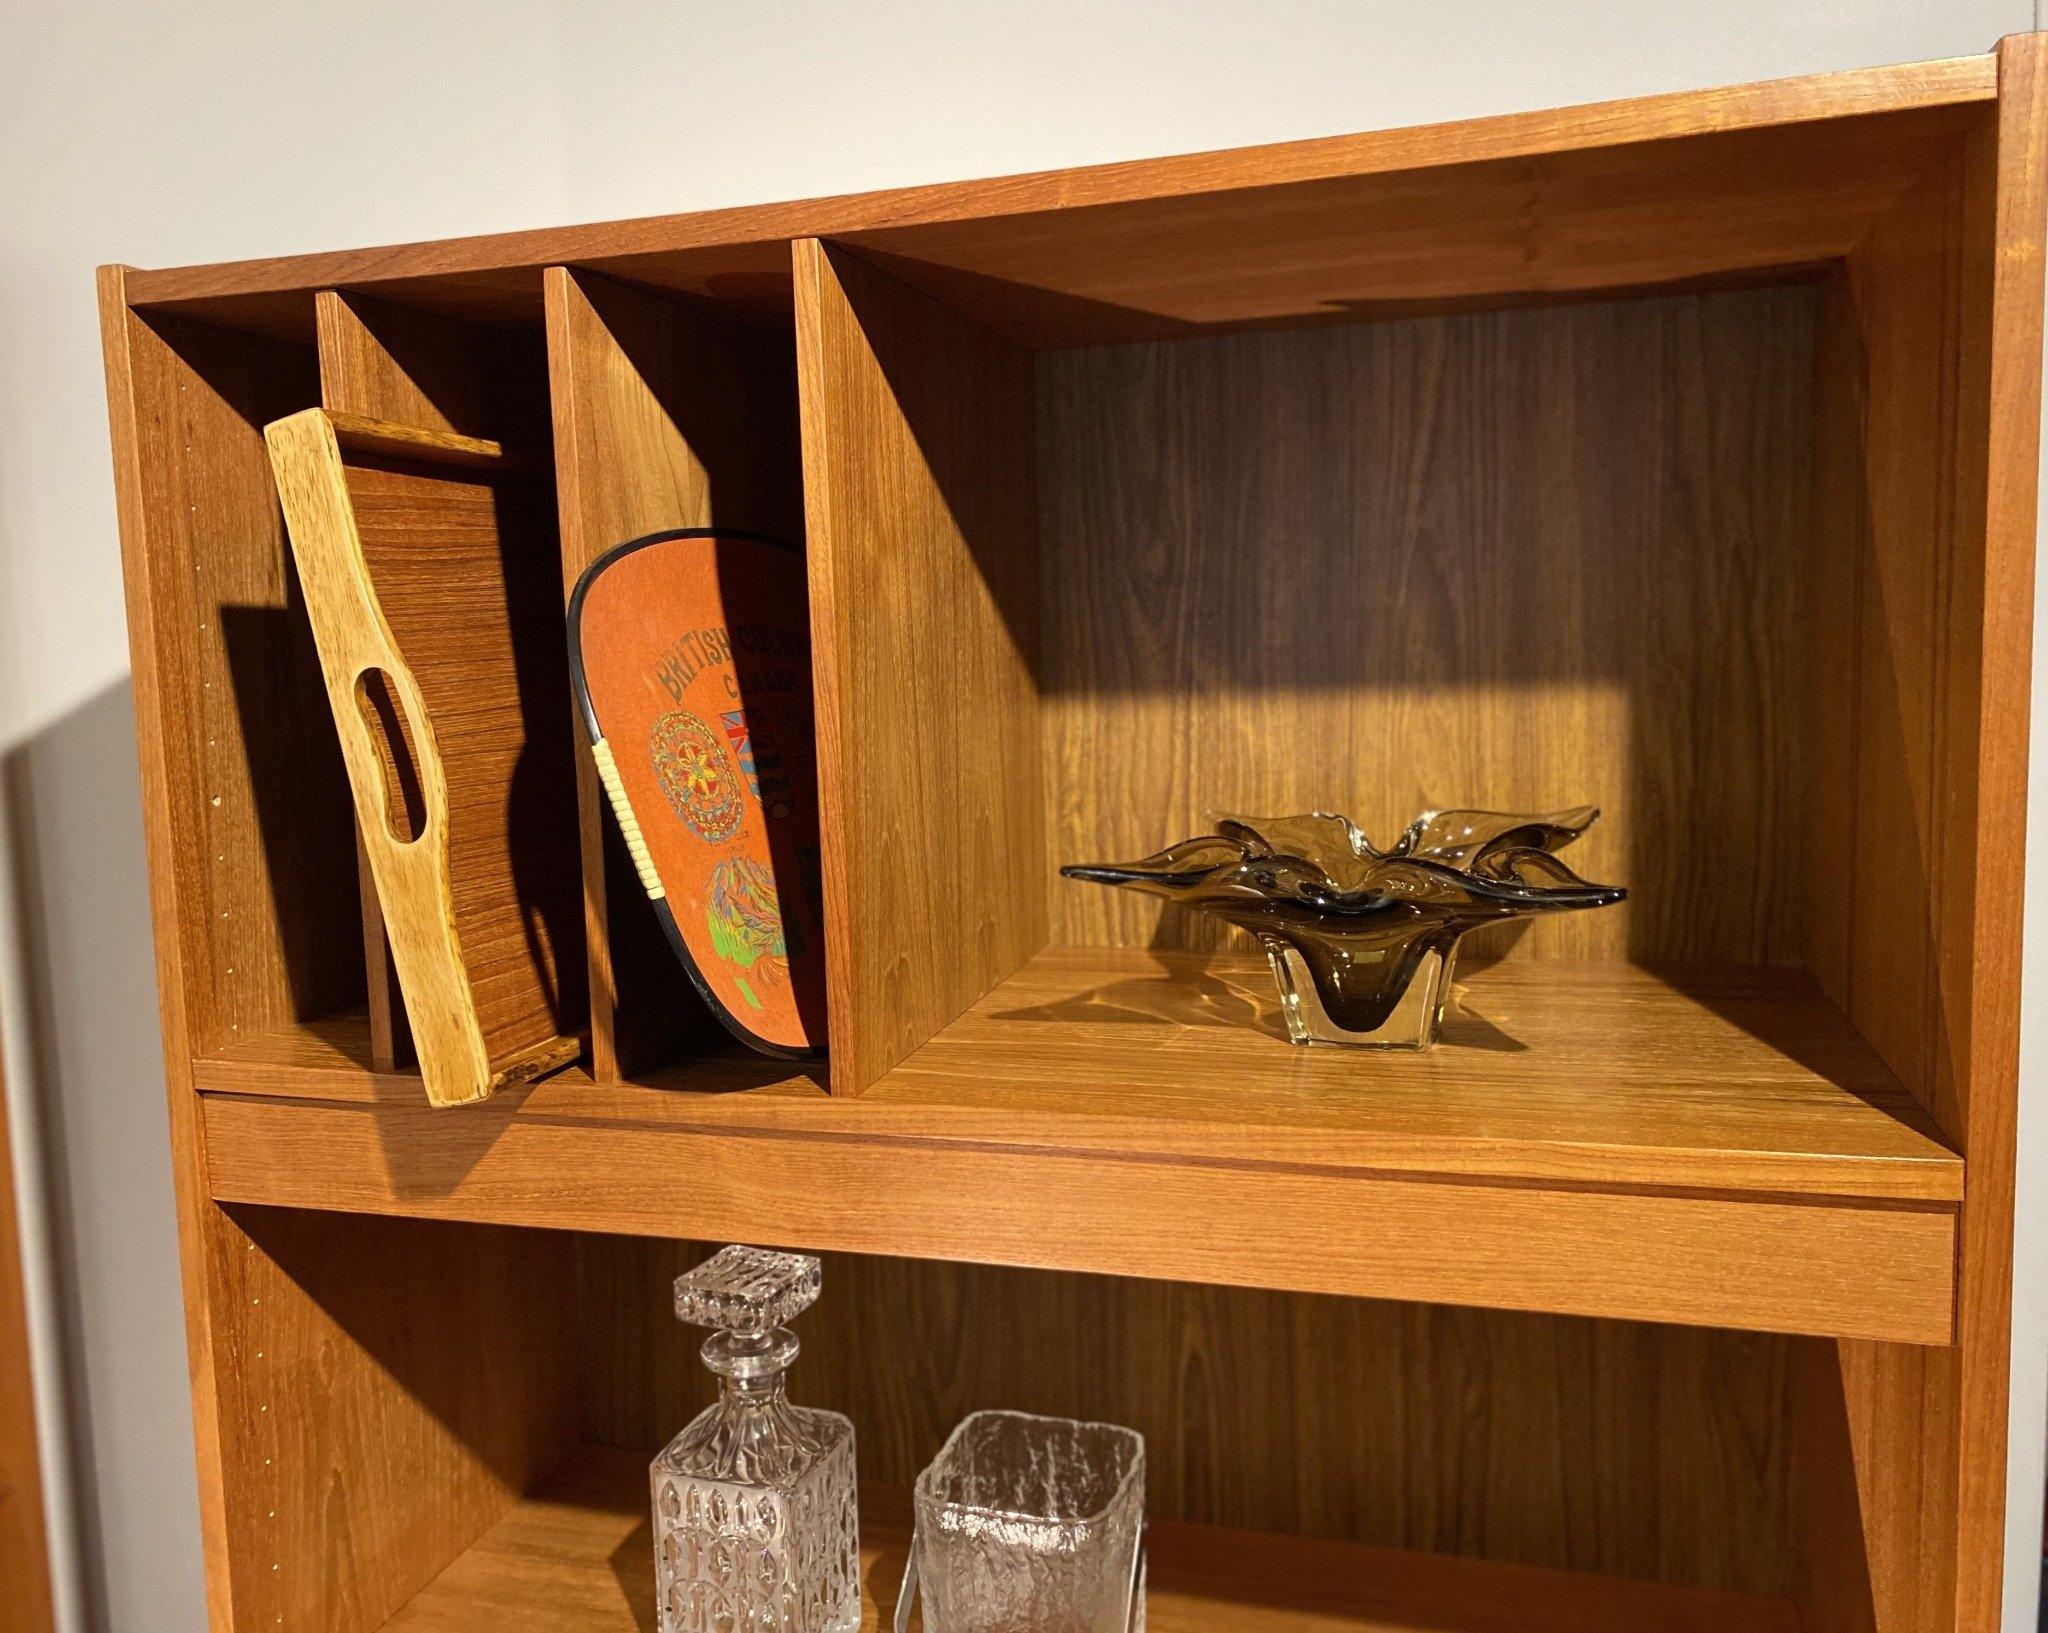 Top half of Danish Teak shelves with art glass and trays- Cook Street Vintage